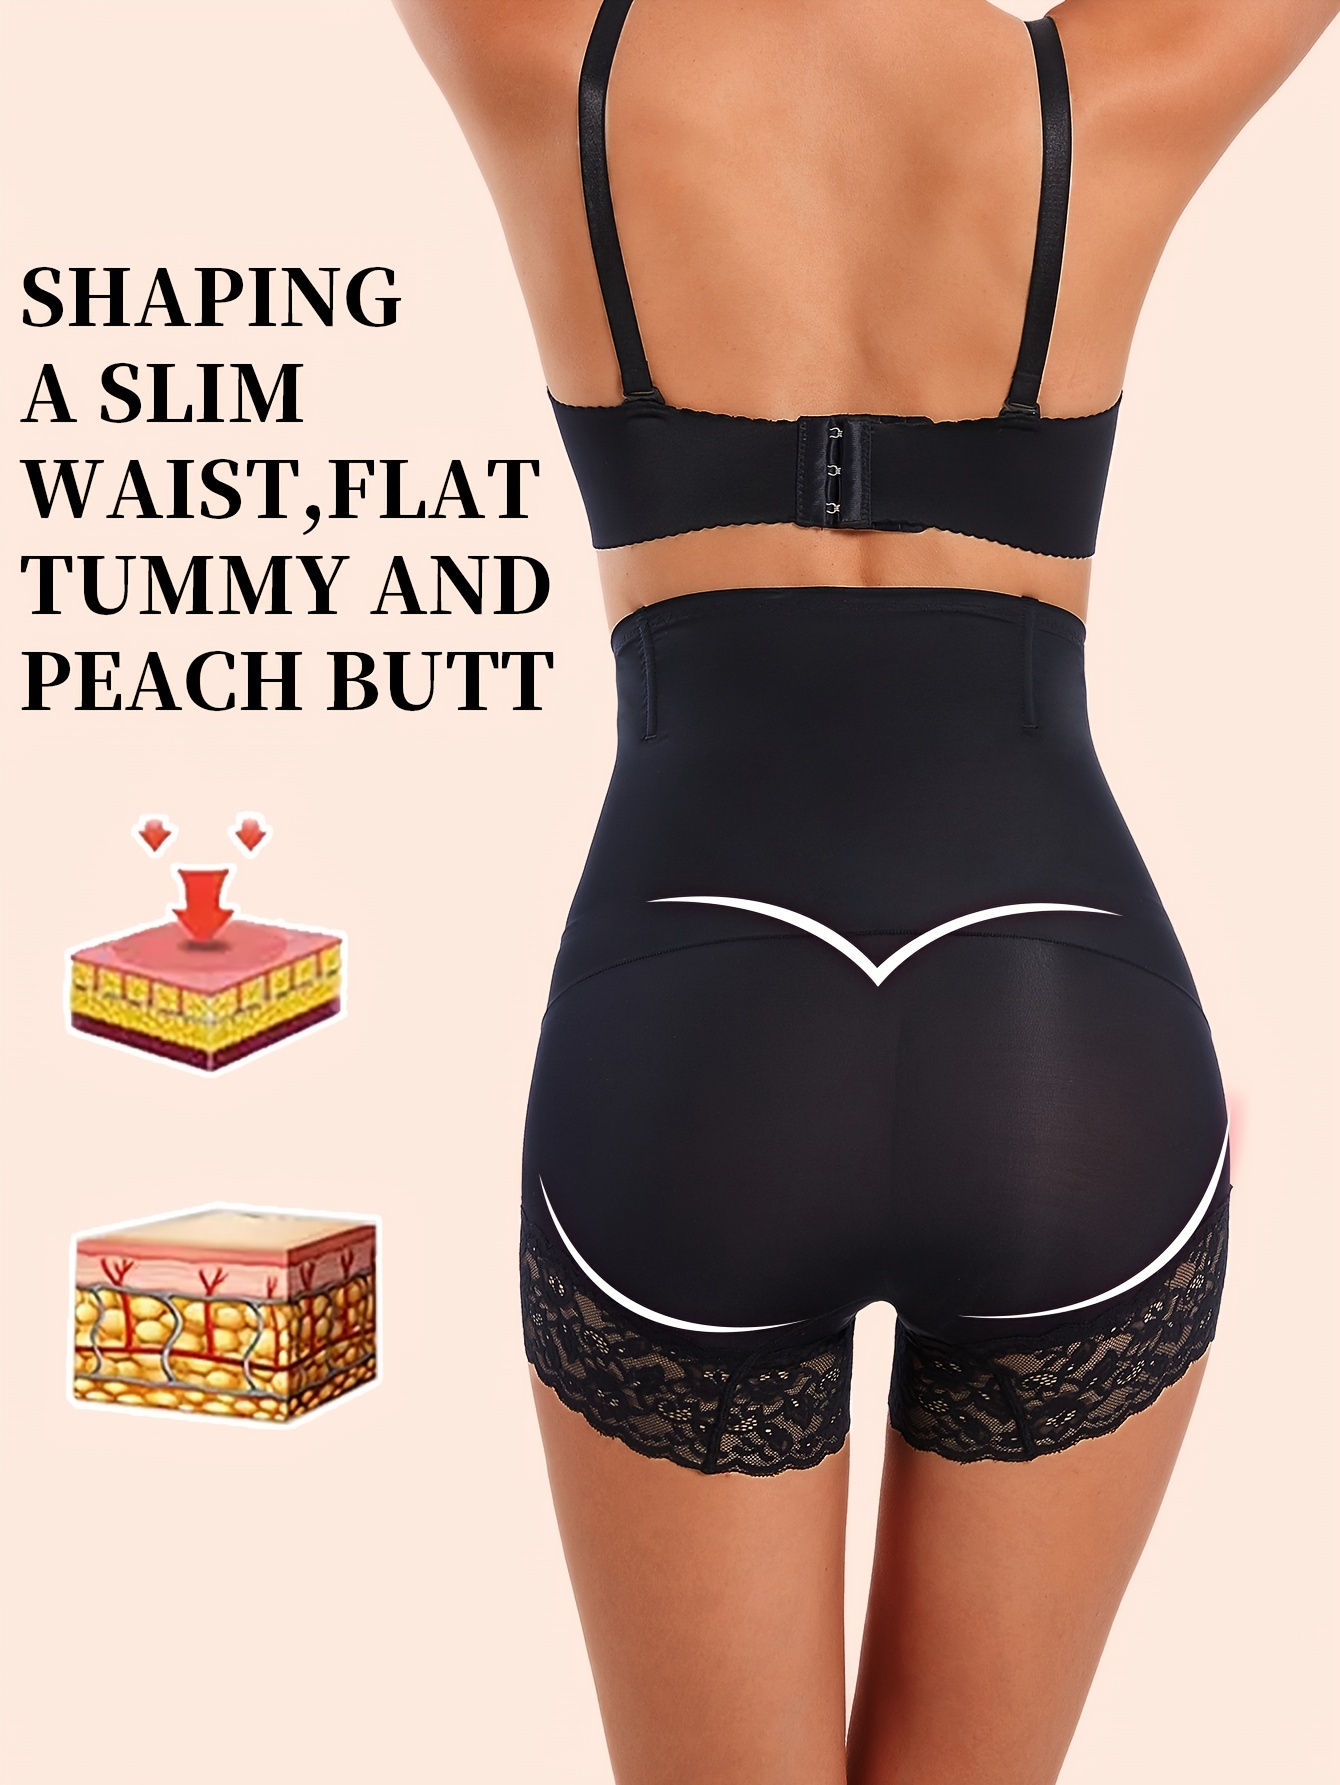 Next FLAT LACE TUMMY CONTROL SHAPING HIGH WAIST KNICKERS - Briefs